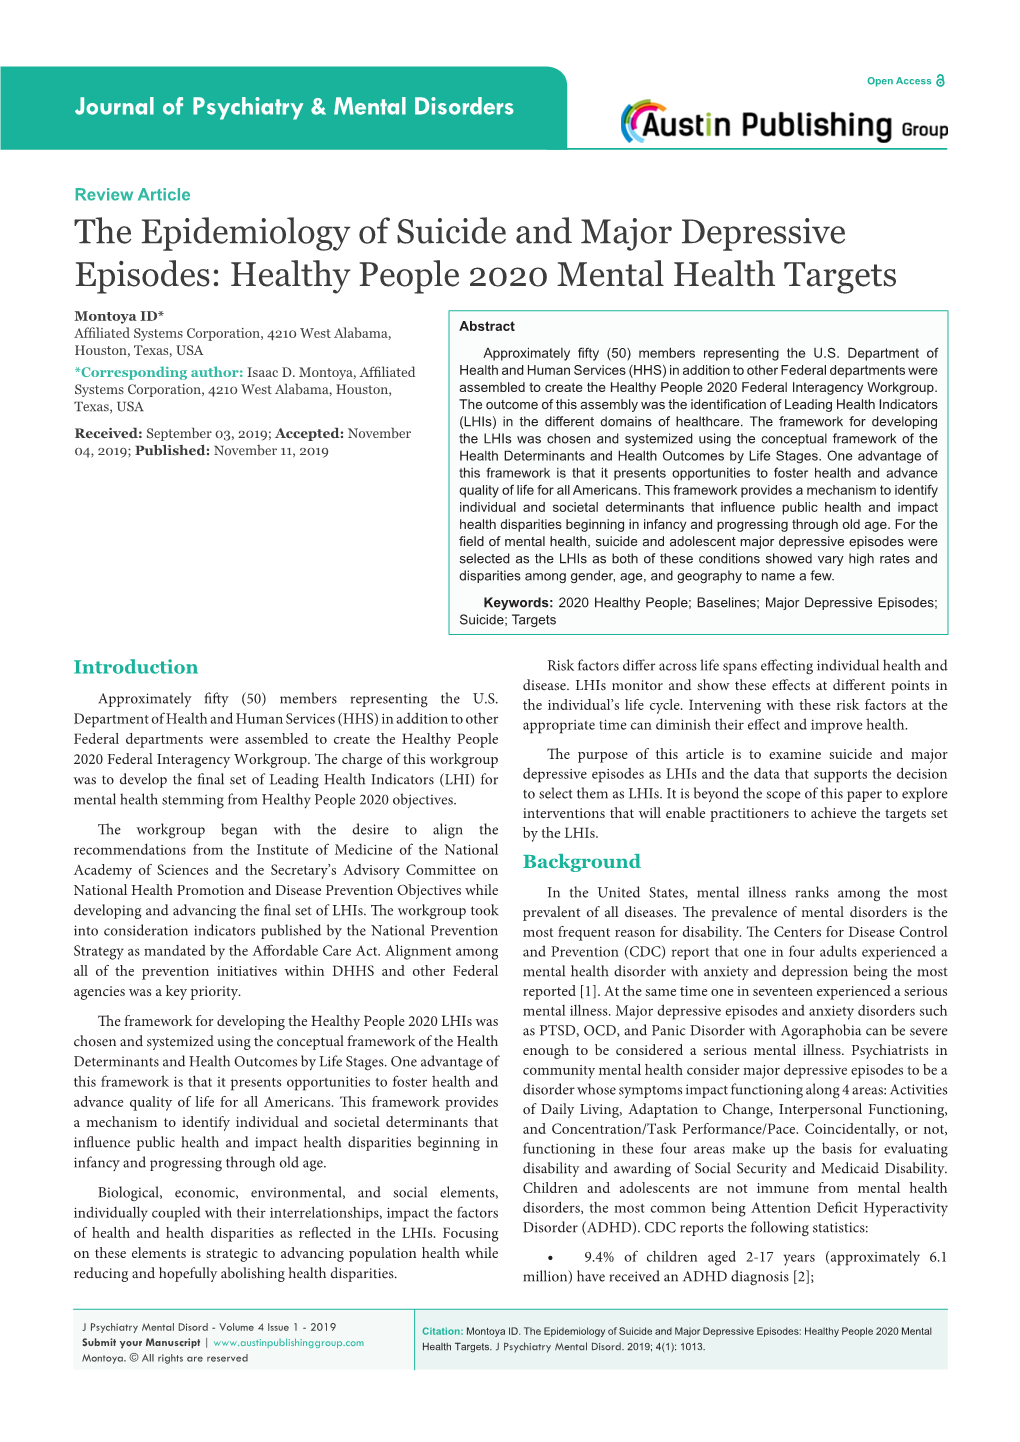 The Epidemiology of Suicide and Major Depressive Episodes: Healthy People 2020 Mental Health Targets